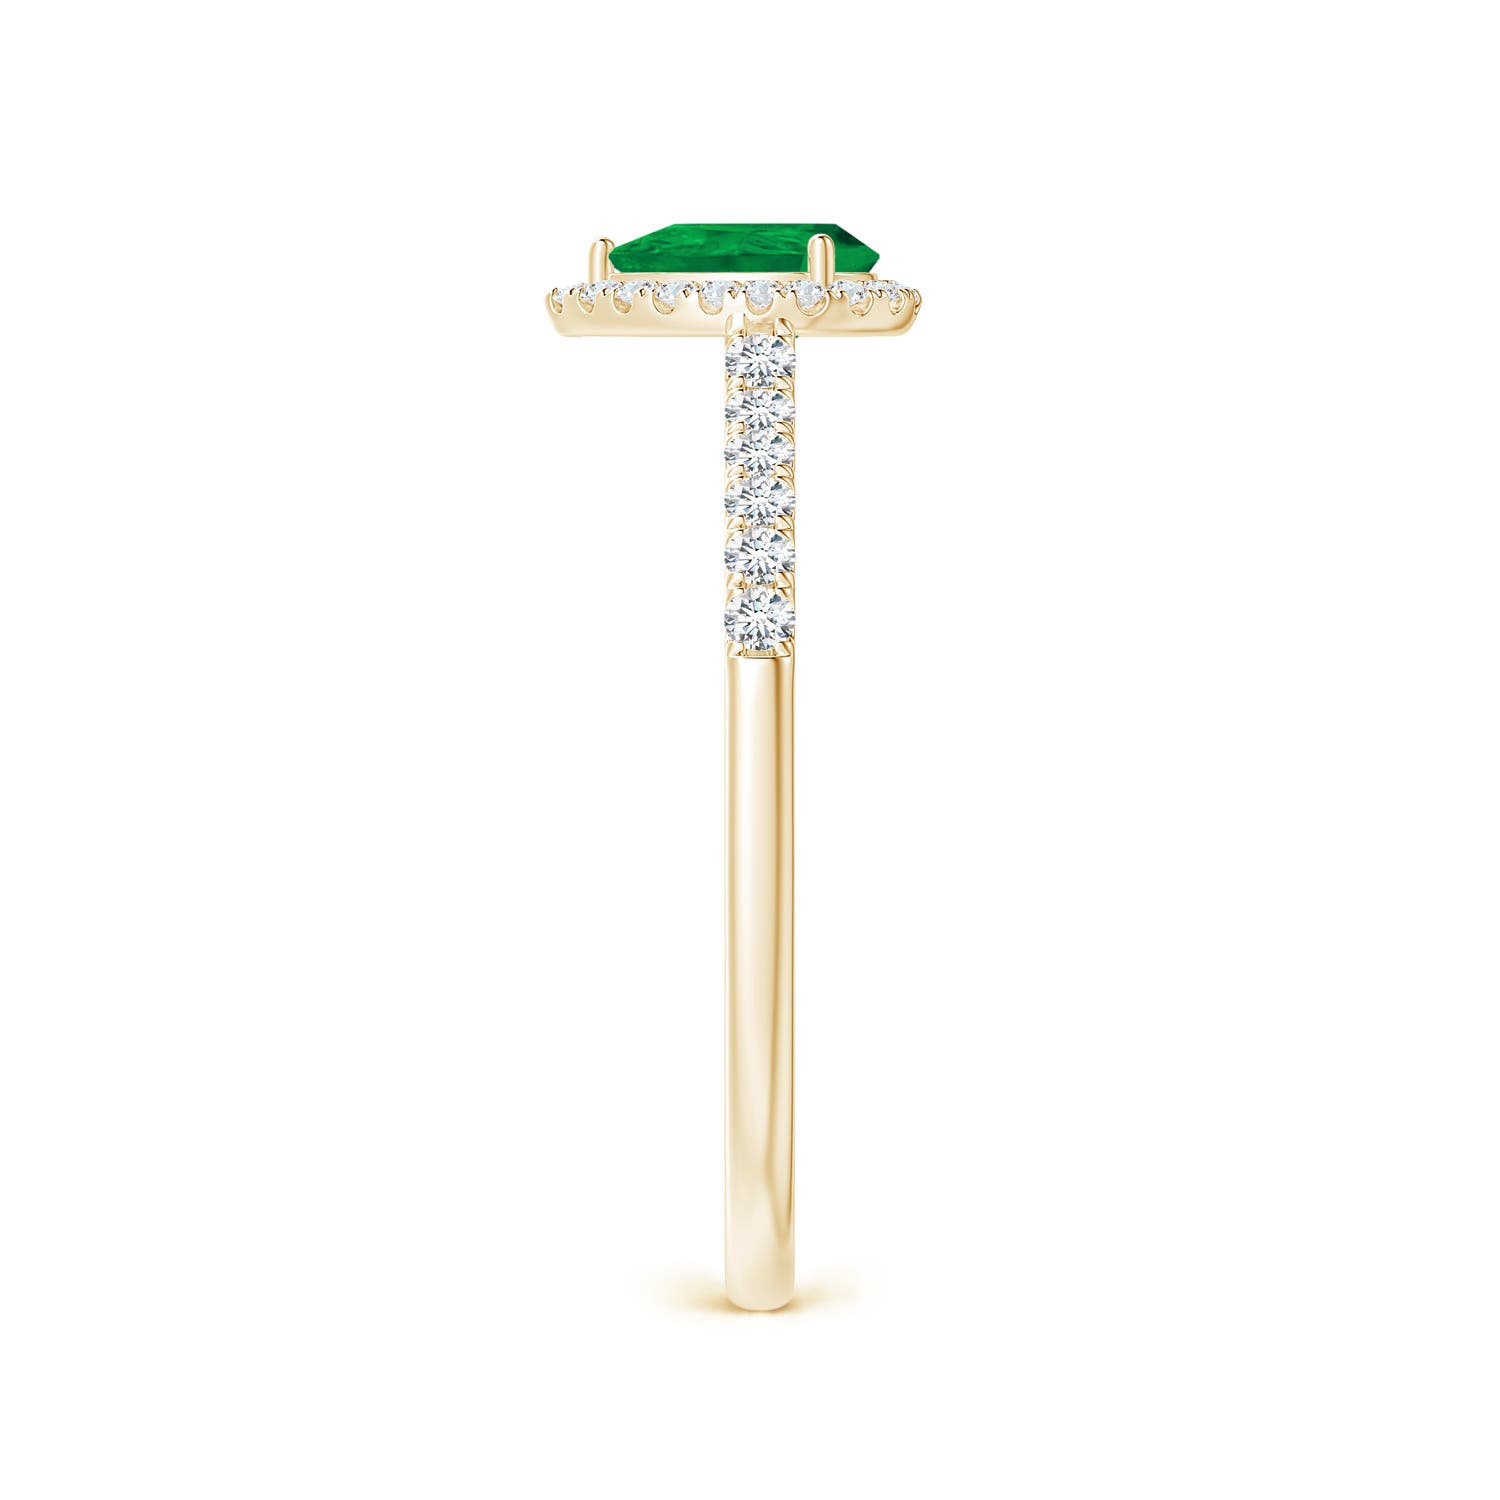 AA - Emerald / 0.56 CT / 14 KT Yellow Gold